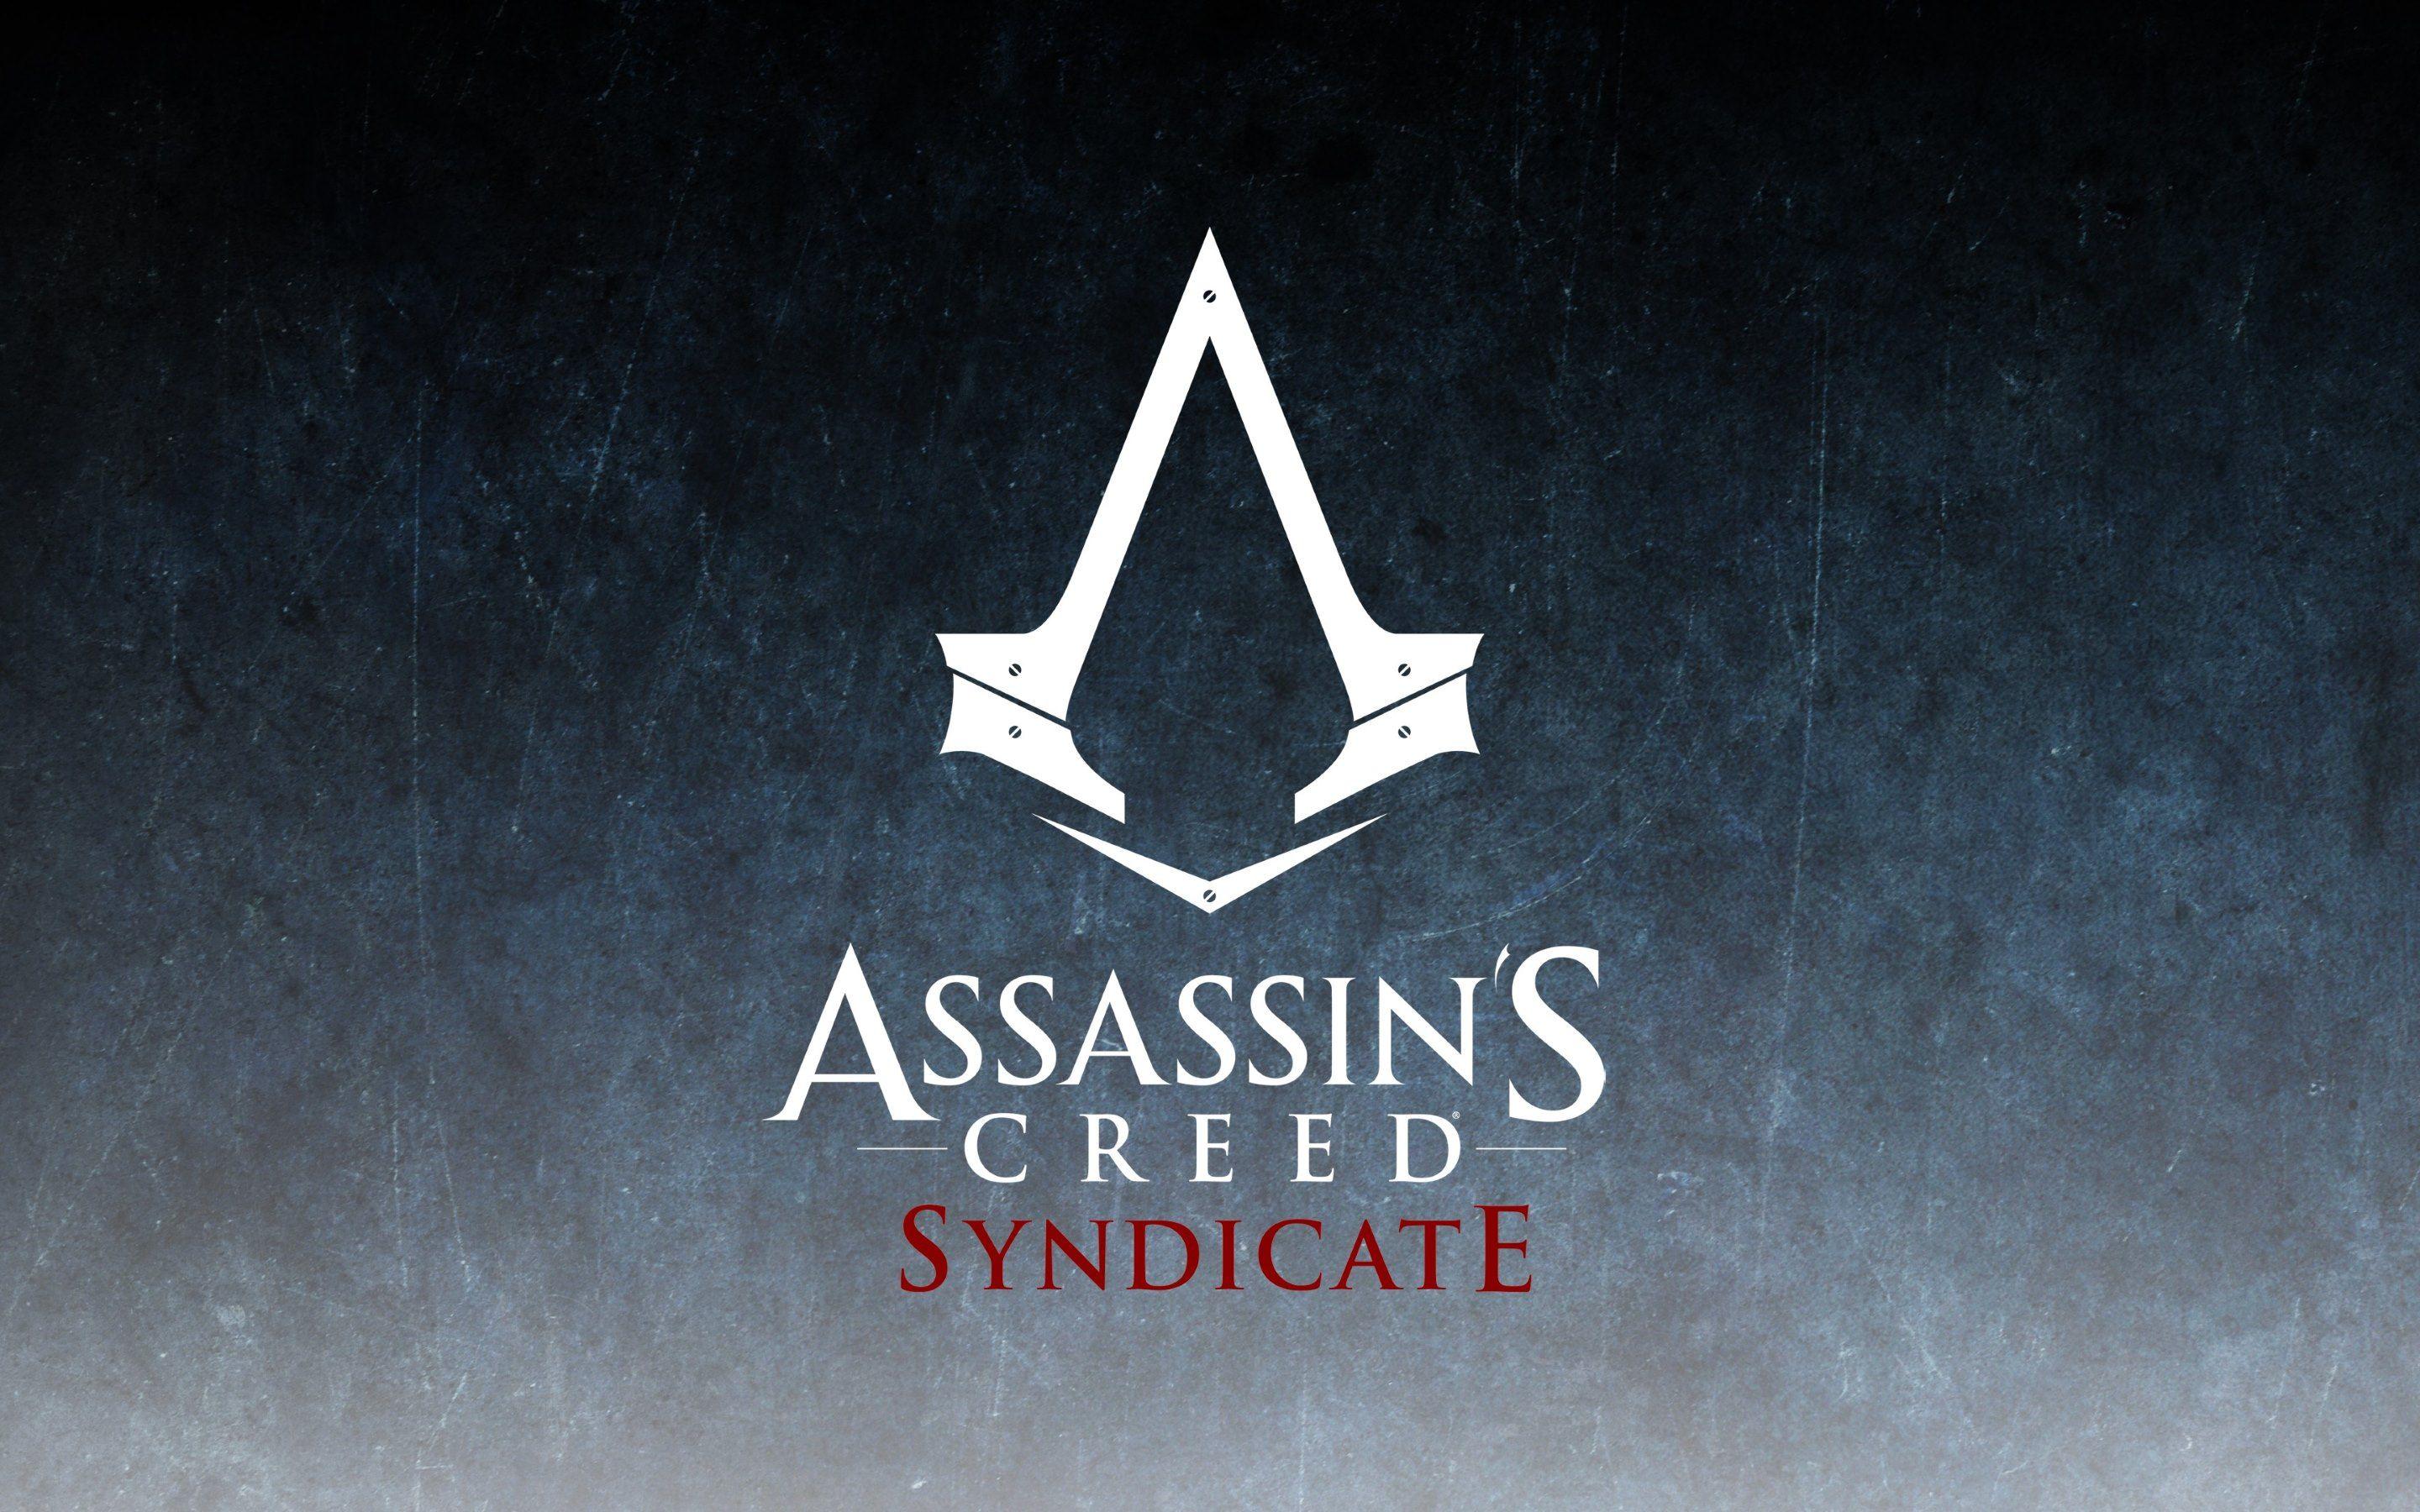 Assassin&Creed Syndicate Wallpapers · 4K HD Desktop Backgrounds